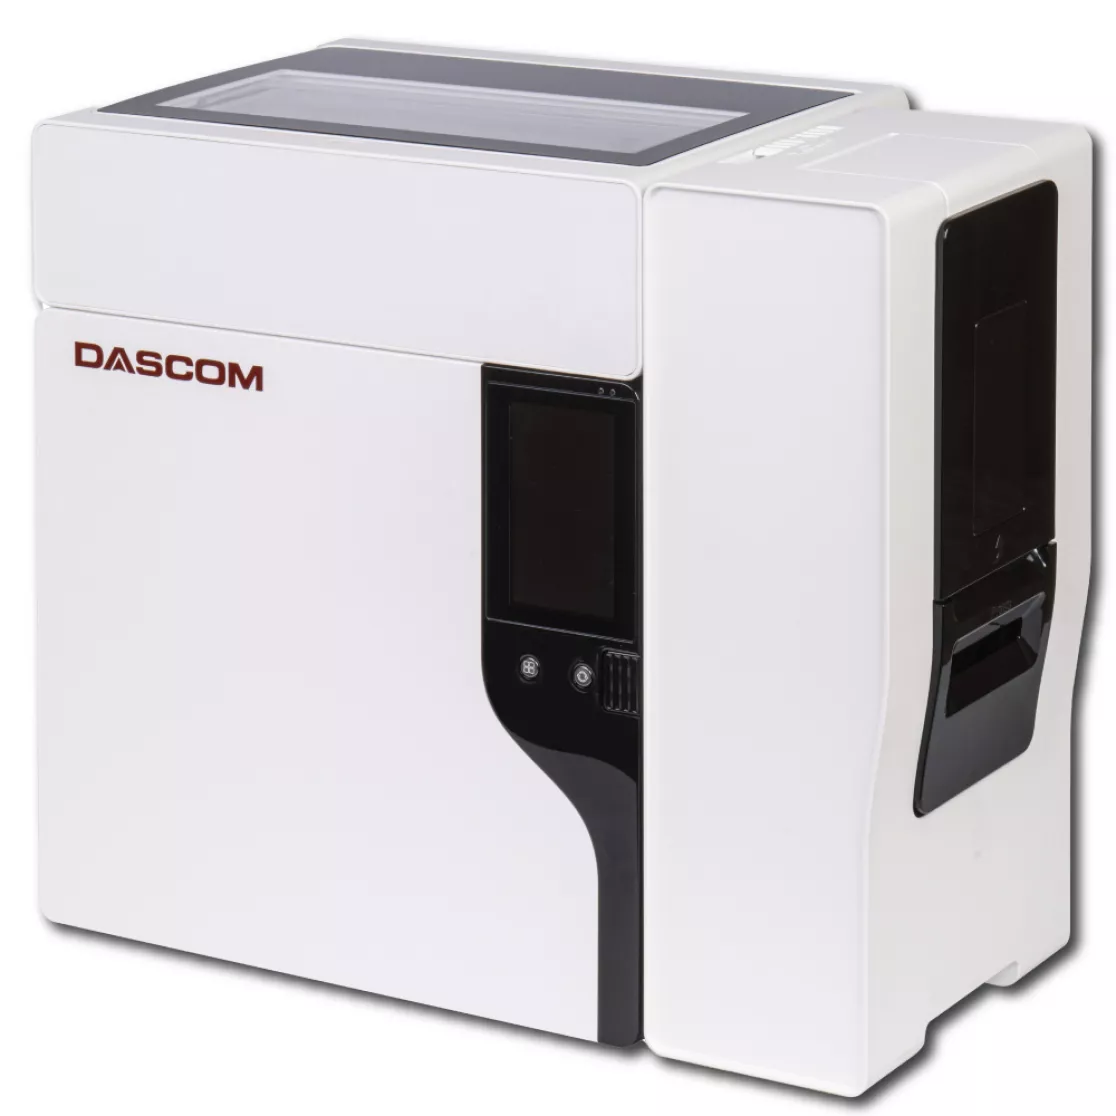 Dascom DC-8600 with double Card Feeder Front